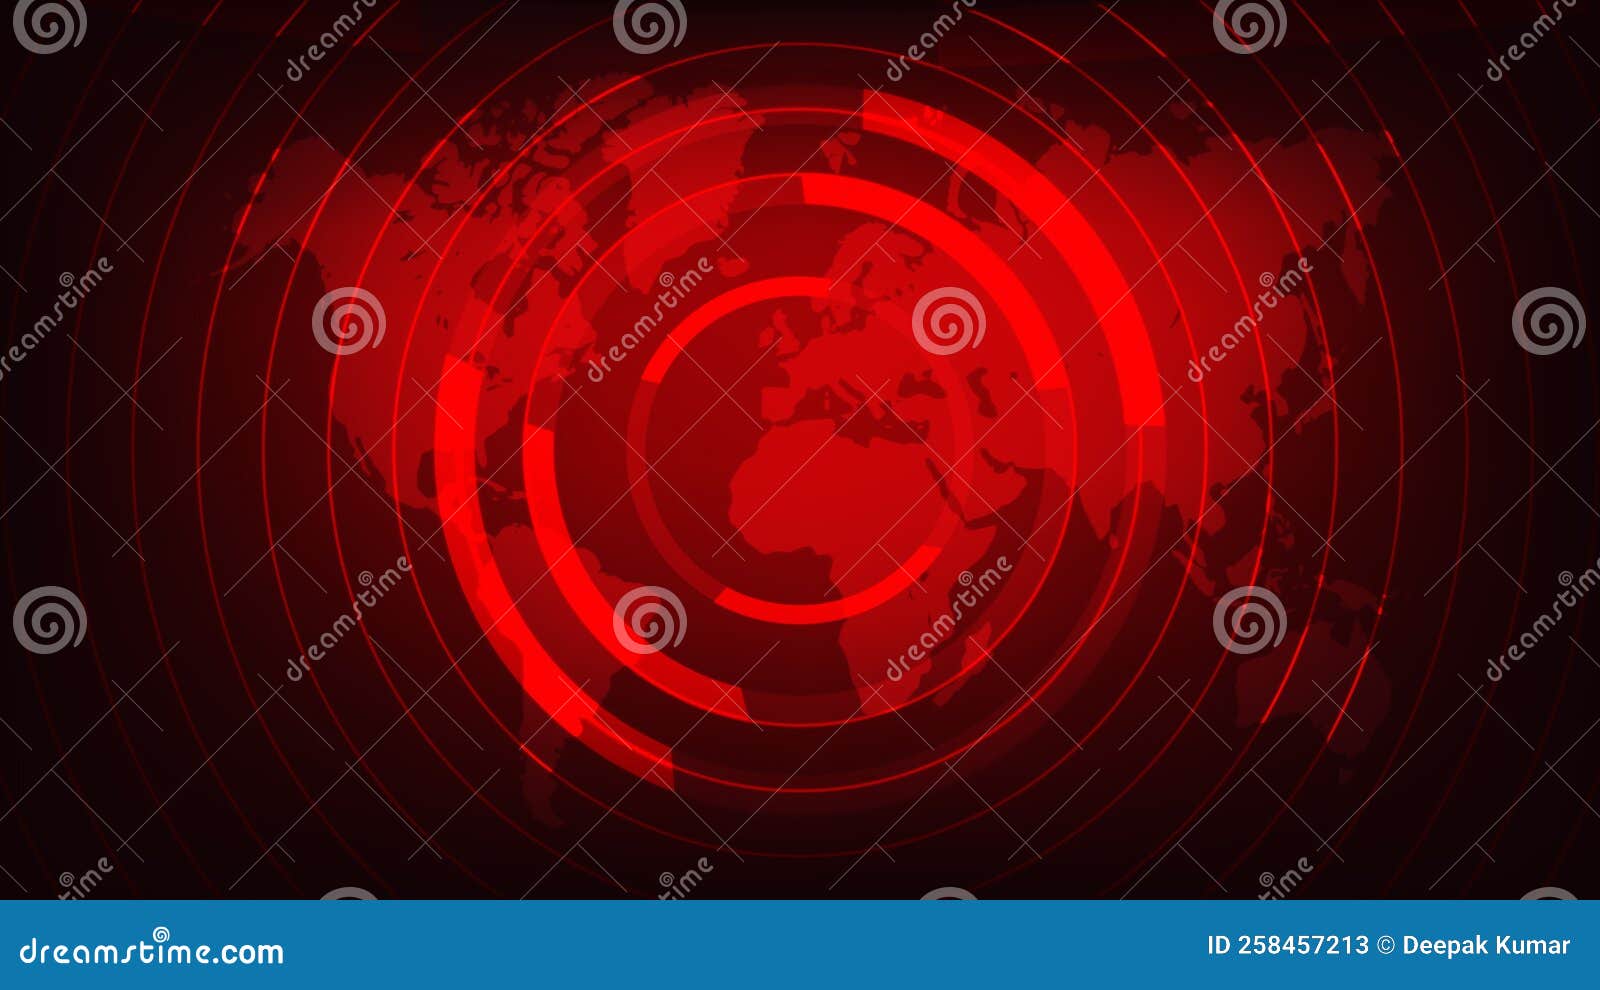 red alarming color and world map background.